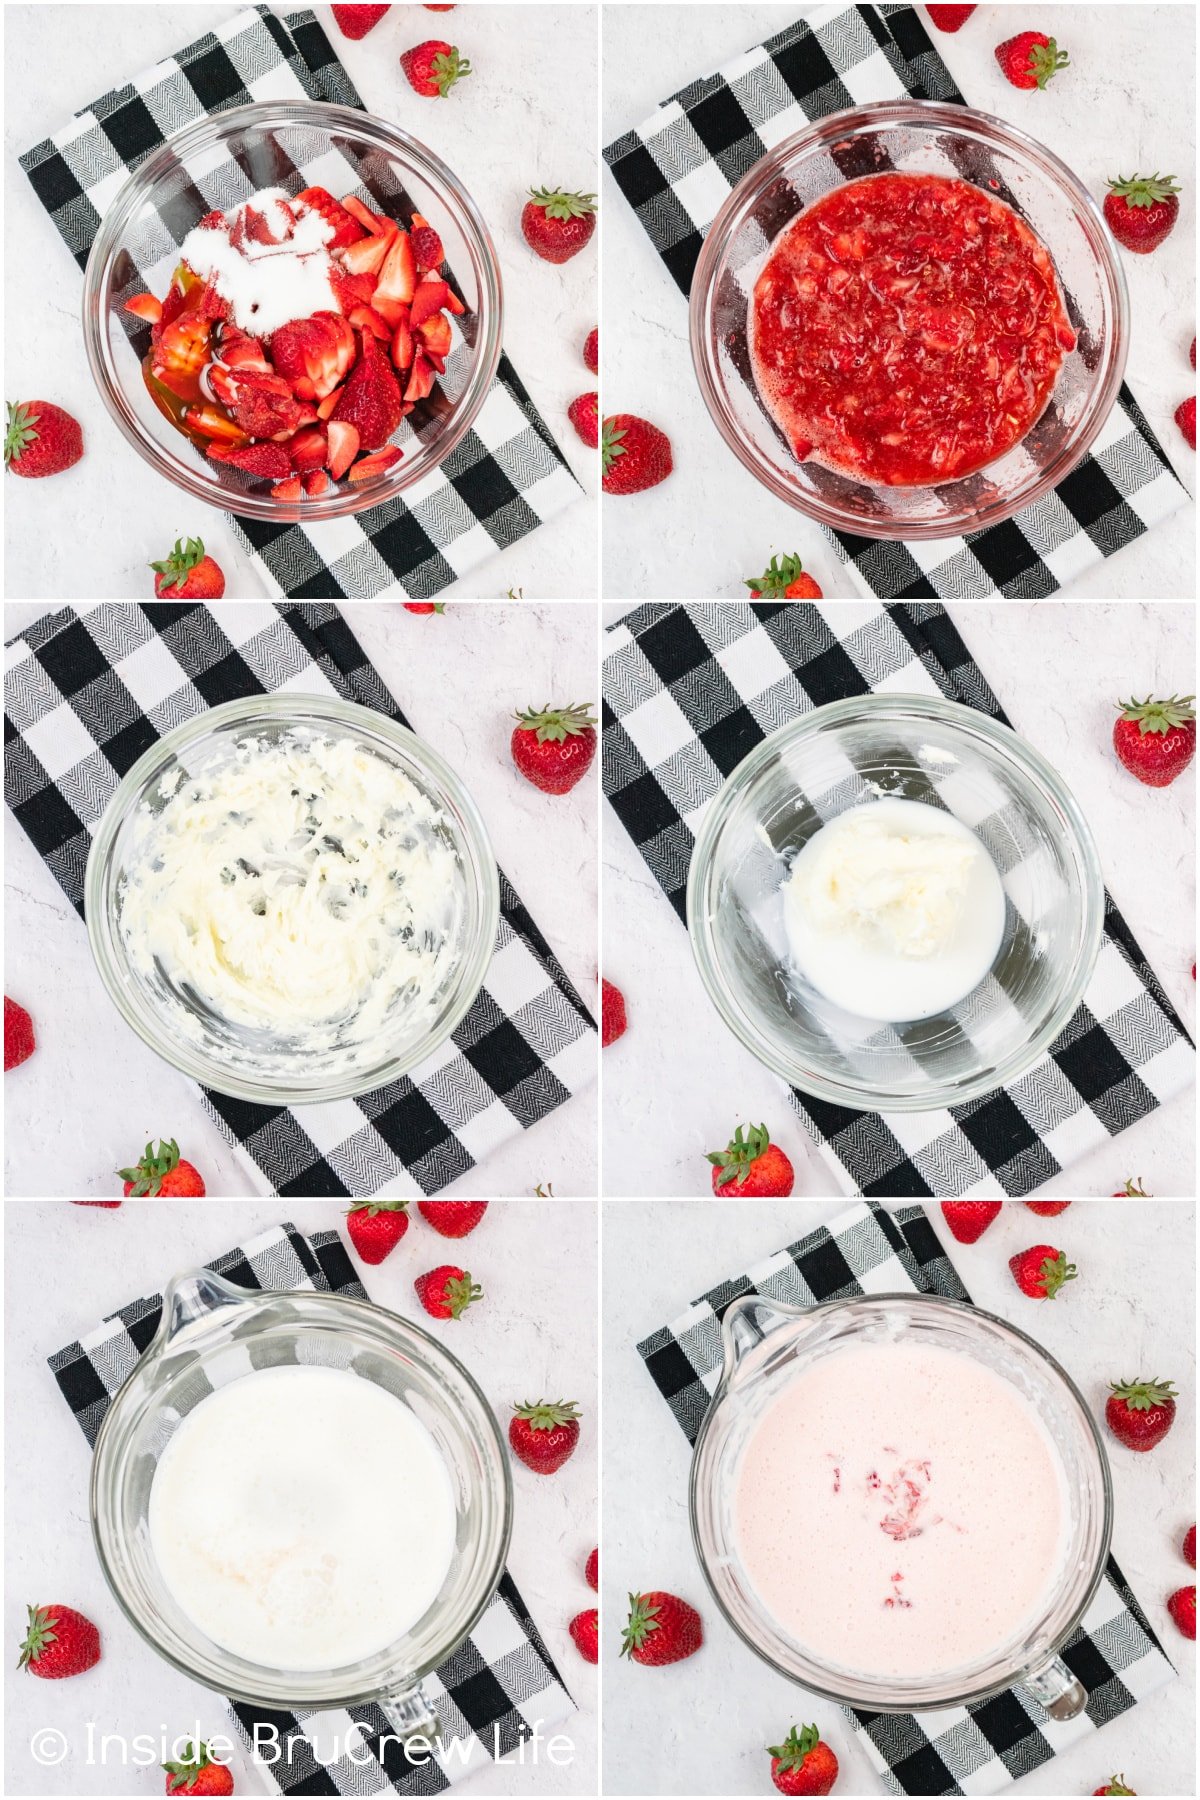 Six pictures collaged together showing how to make the base for strawberry ice cream.